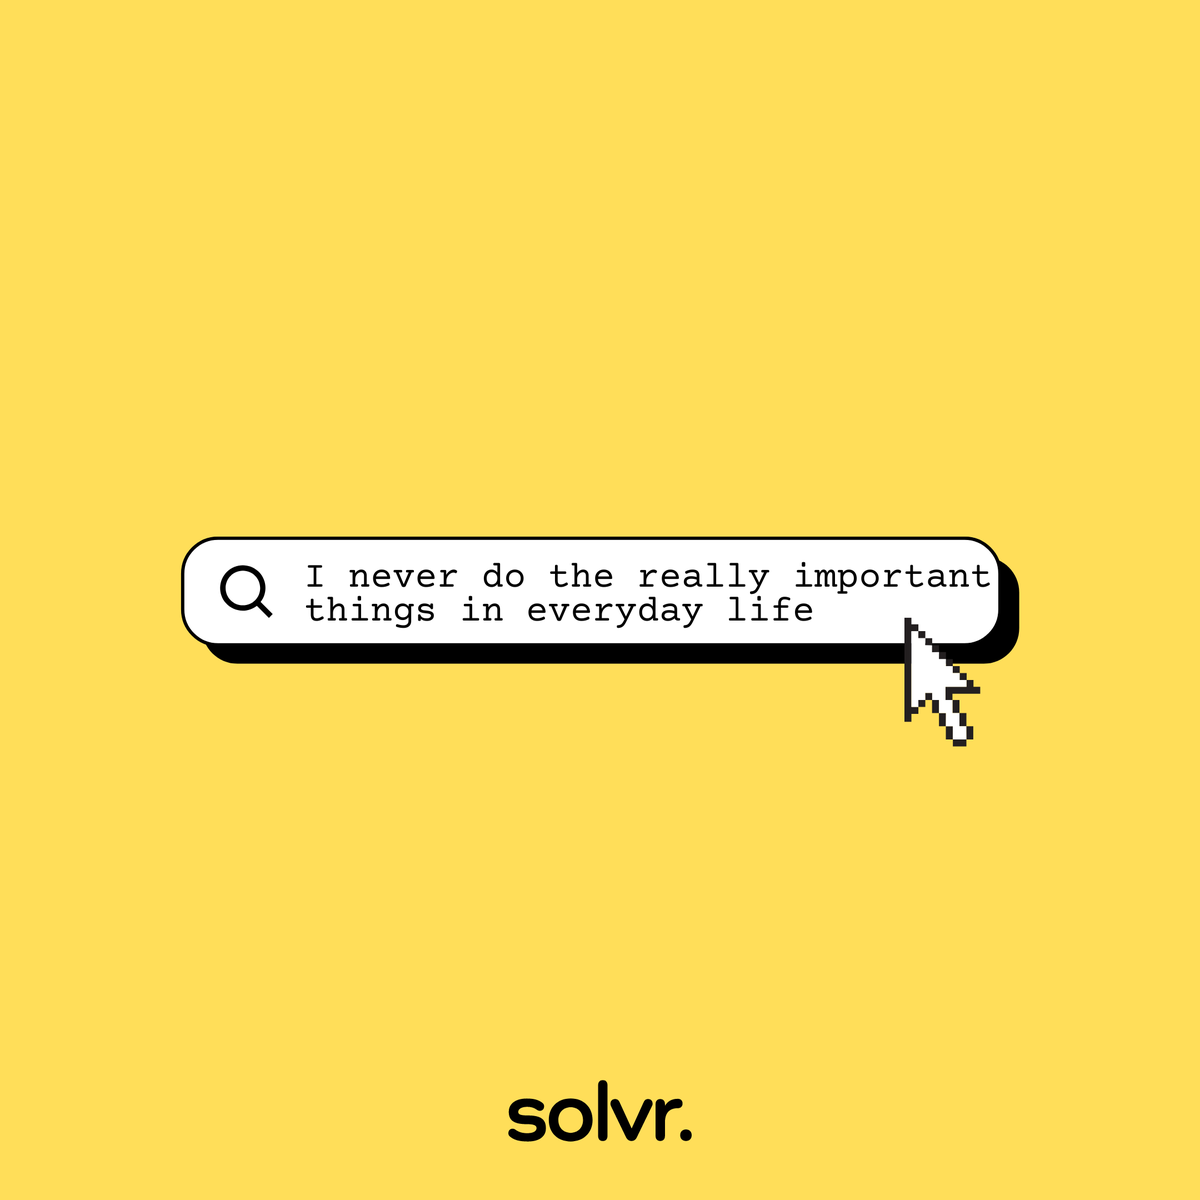 solvr. helps you complete tasks proactively and on time. 💪

#consideritdone #virtualexperts #consultationlightningfast #haveaniceday